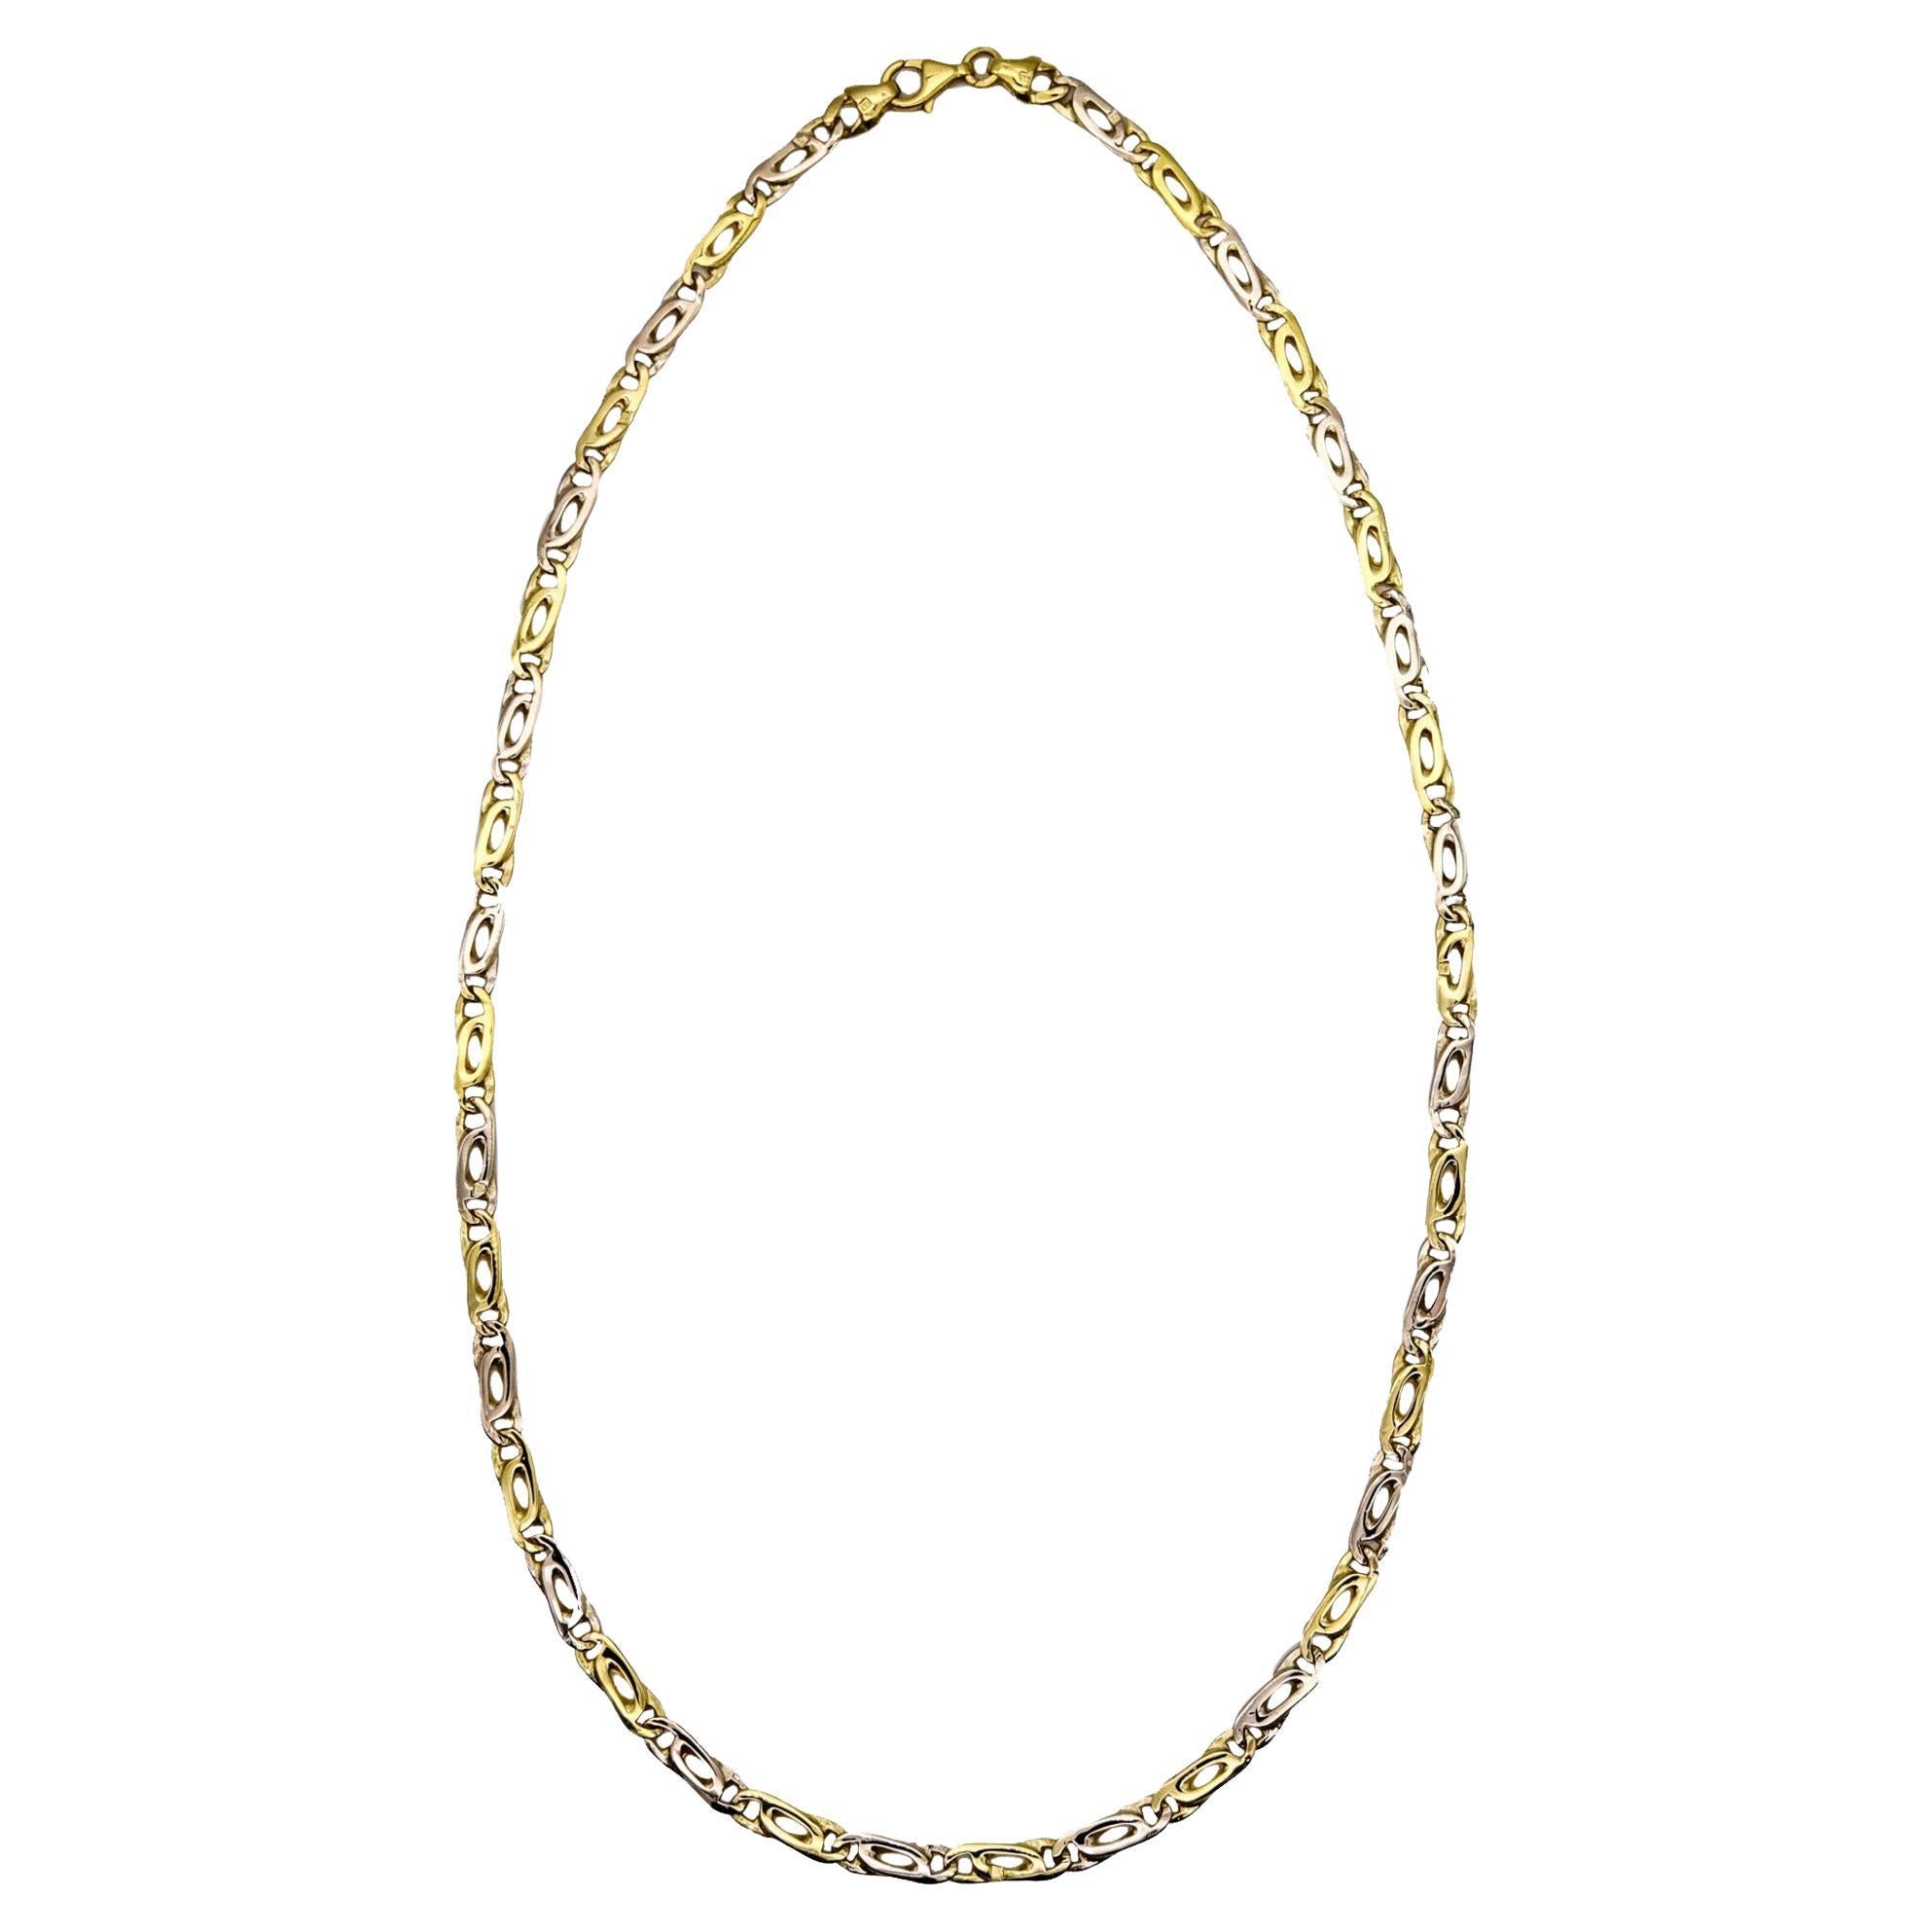 Italian Modernist Two Tones Links Chain in Solid 18Kt White And Yellow Gold For Sale